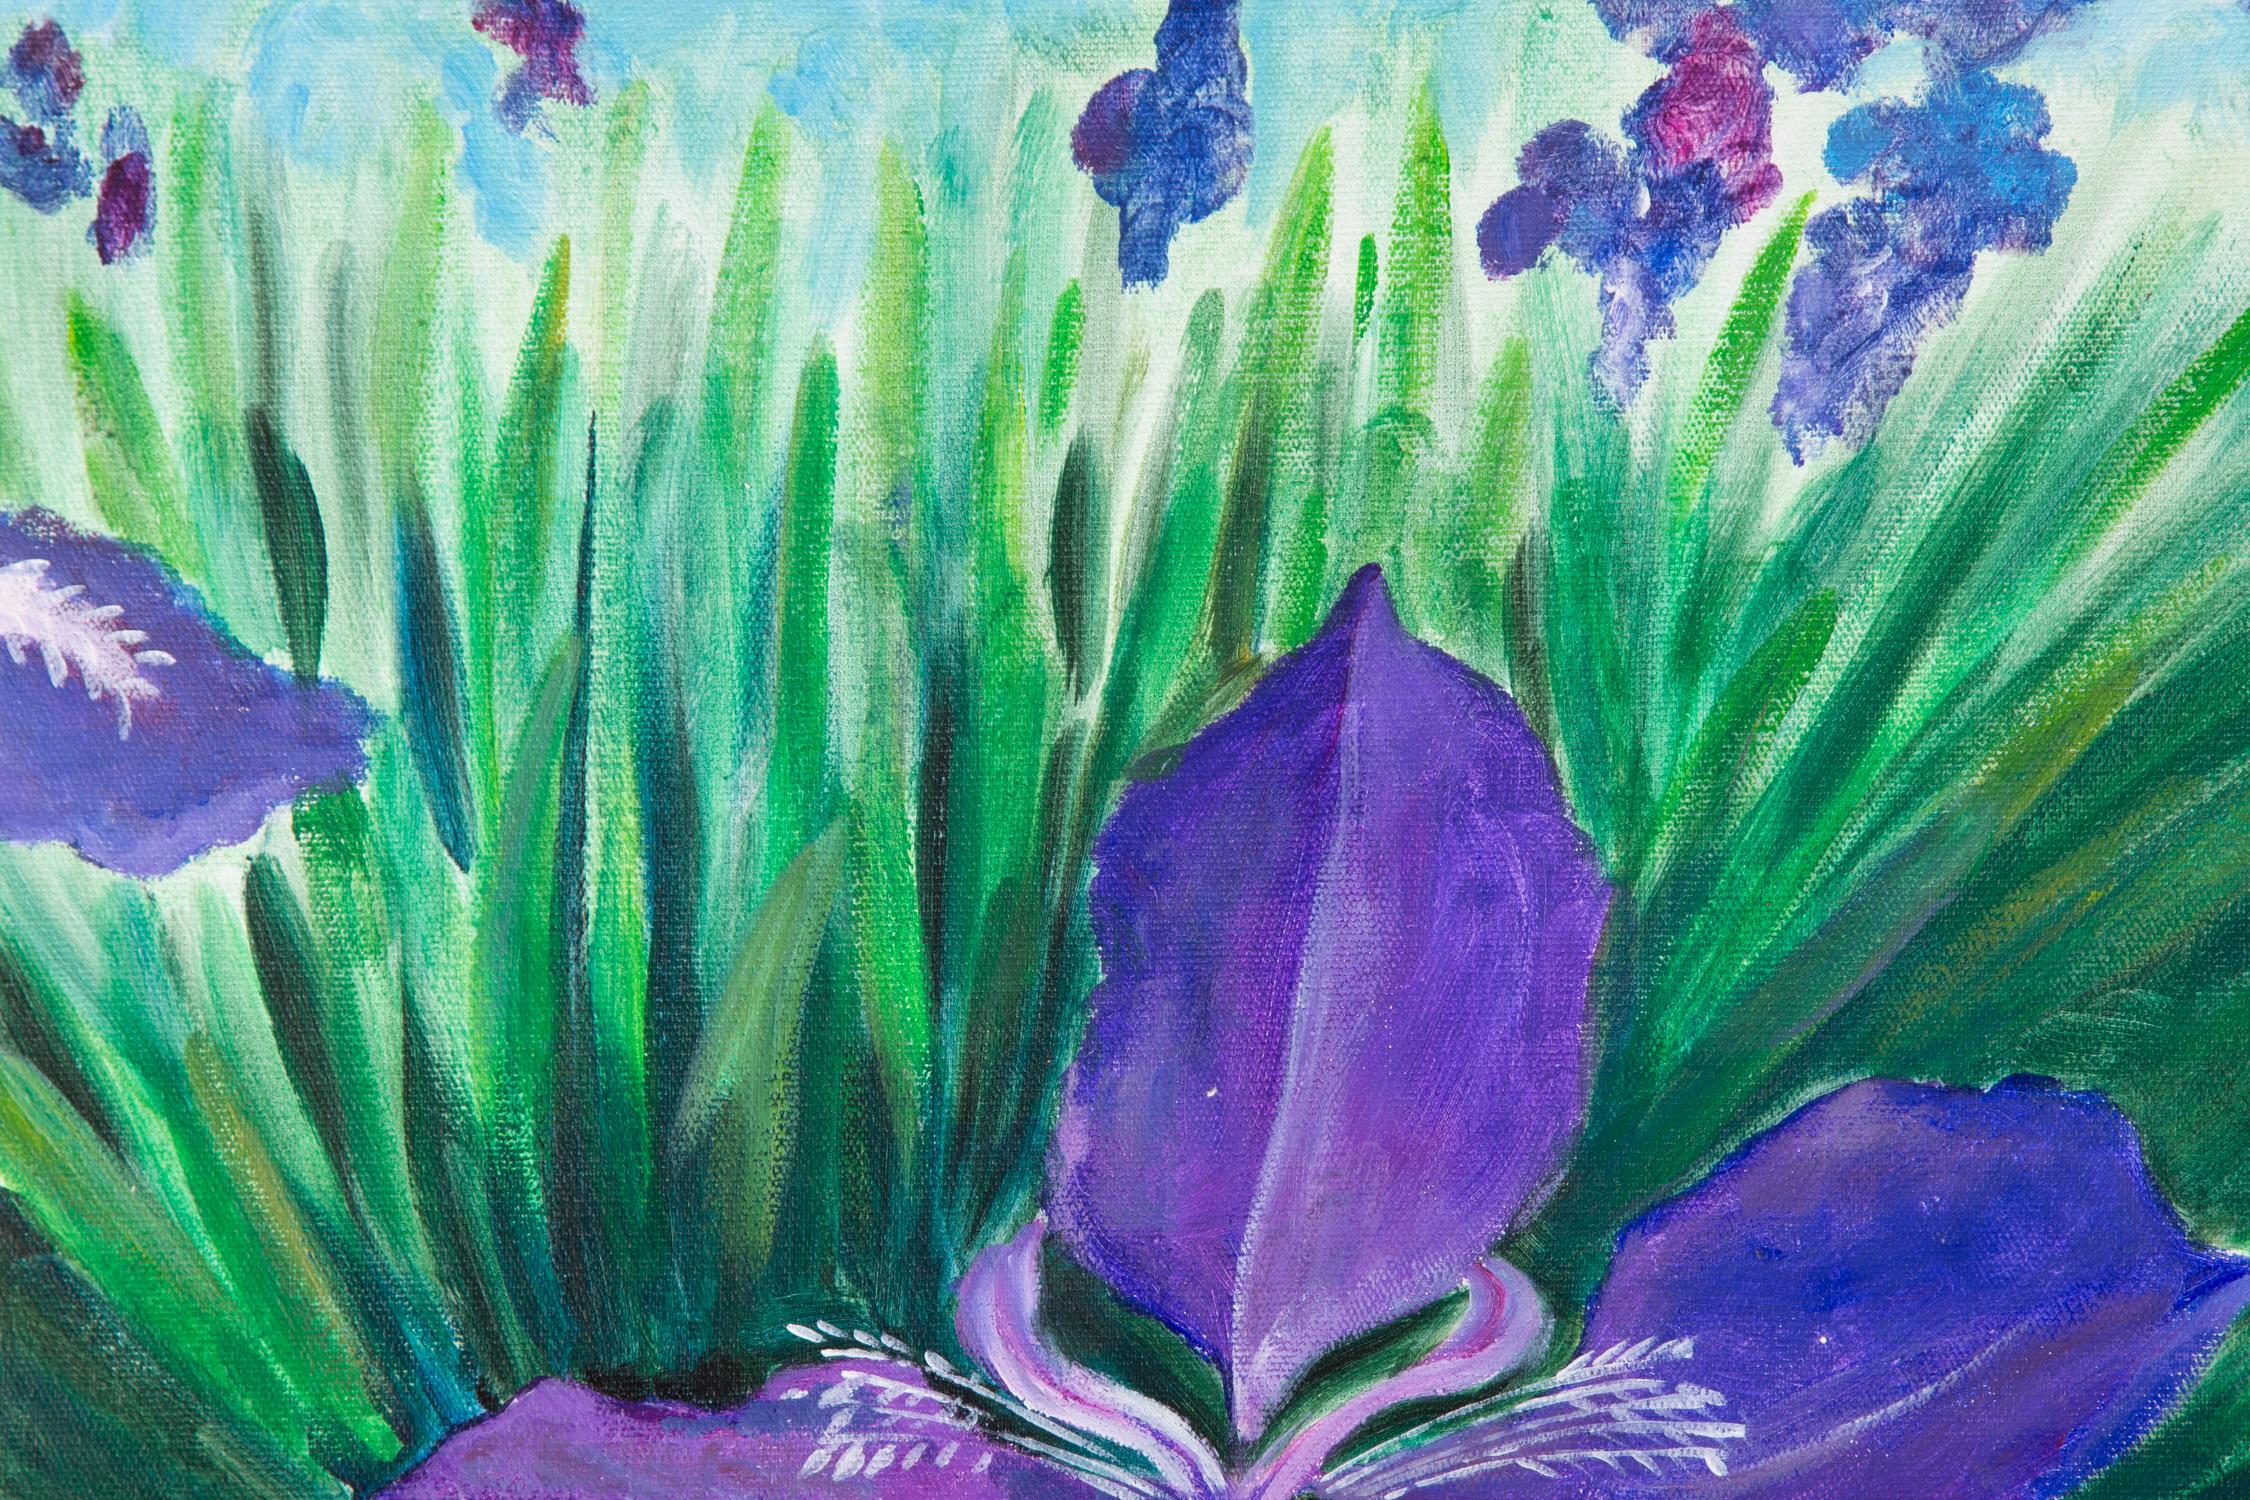  Title: Iris 3
 Medium: Oil on canvas
 Size: 19.75 x 19.5 inches
 Frame: Framing options available!
 Condition: The painting appears to be in excellent condition.
 Note: This painting is unstretched
 Year: 2016
 Artist: Silu Niu
 Signature: Signed
